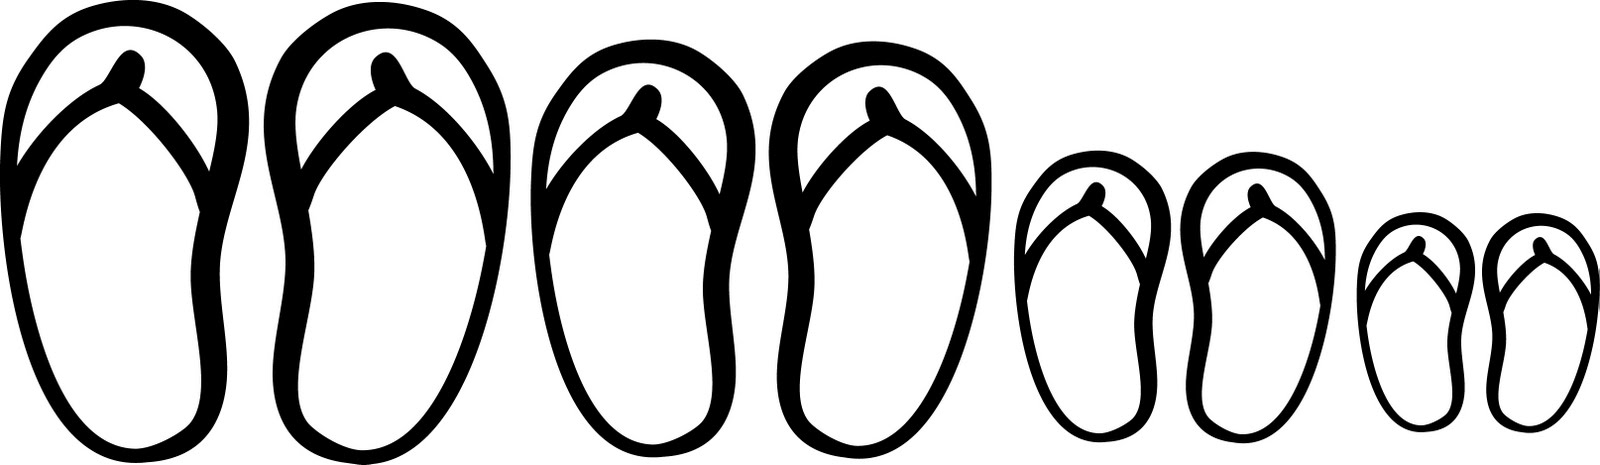 Flip Flop Clipart Black And White   Clipart Panda   Free Clipart    